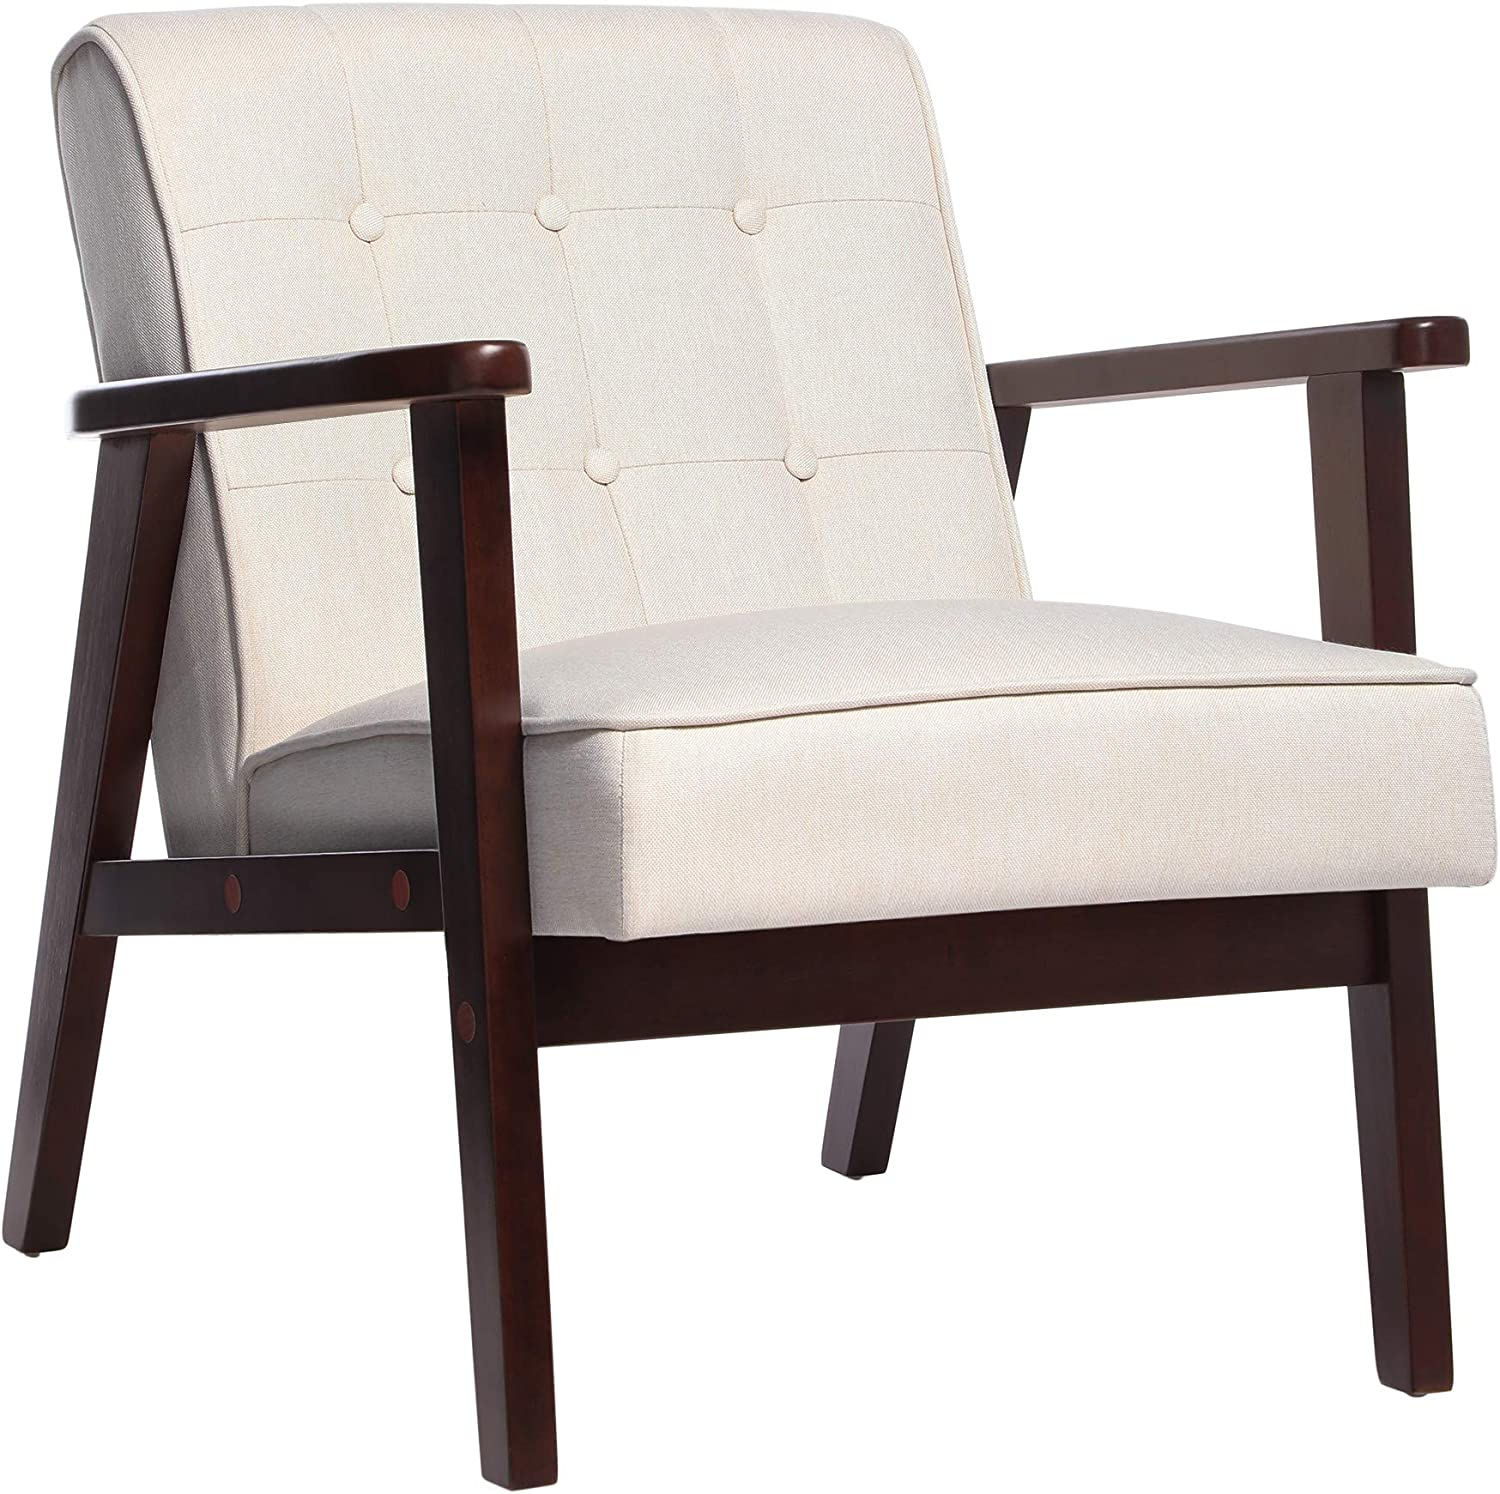 SONGMICS Leisure Chair with Solid Wood Armrest and Feet (Beige) $89.09